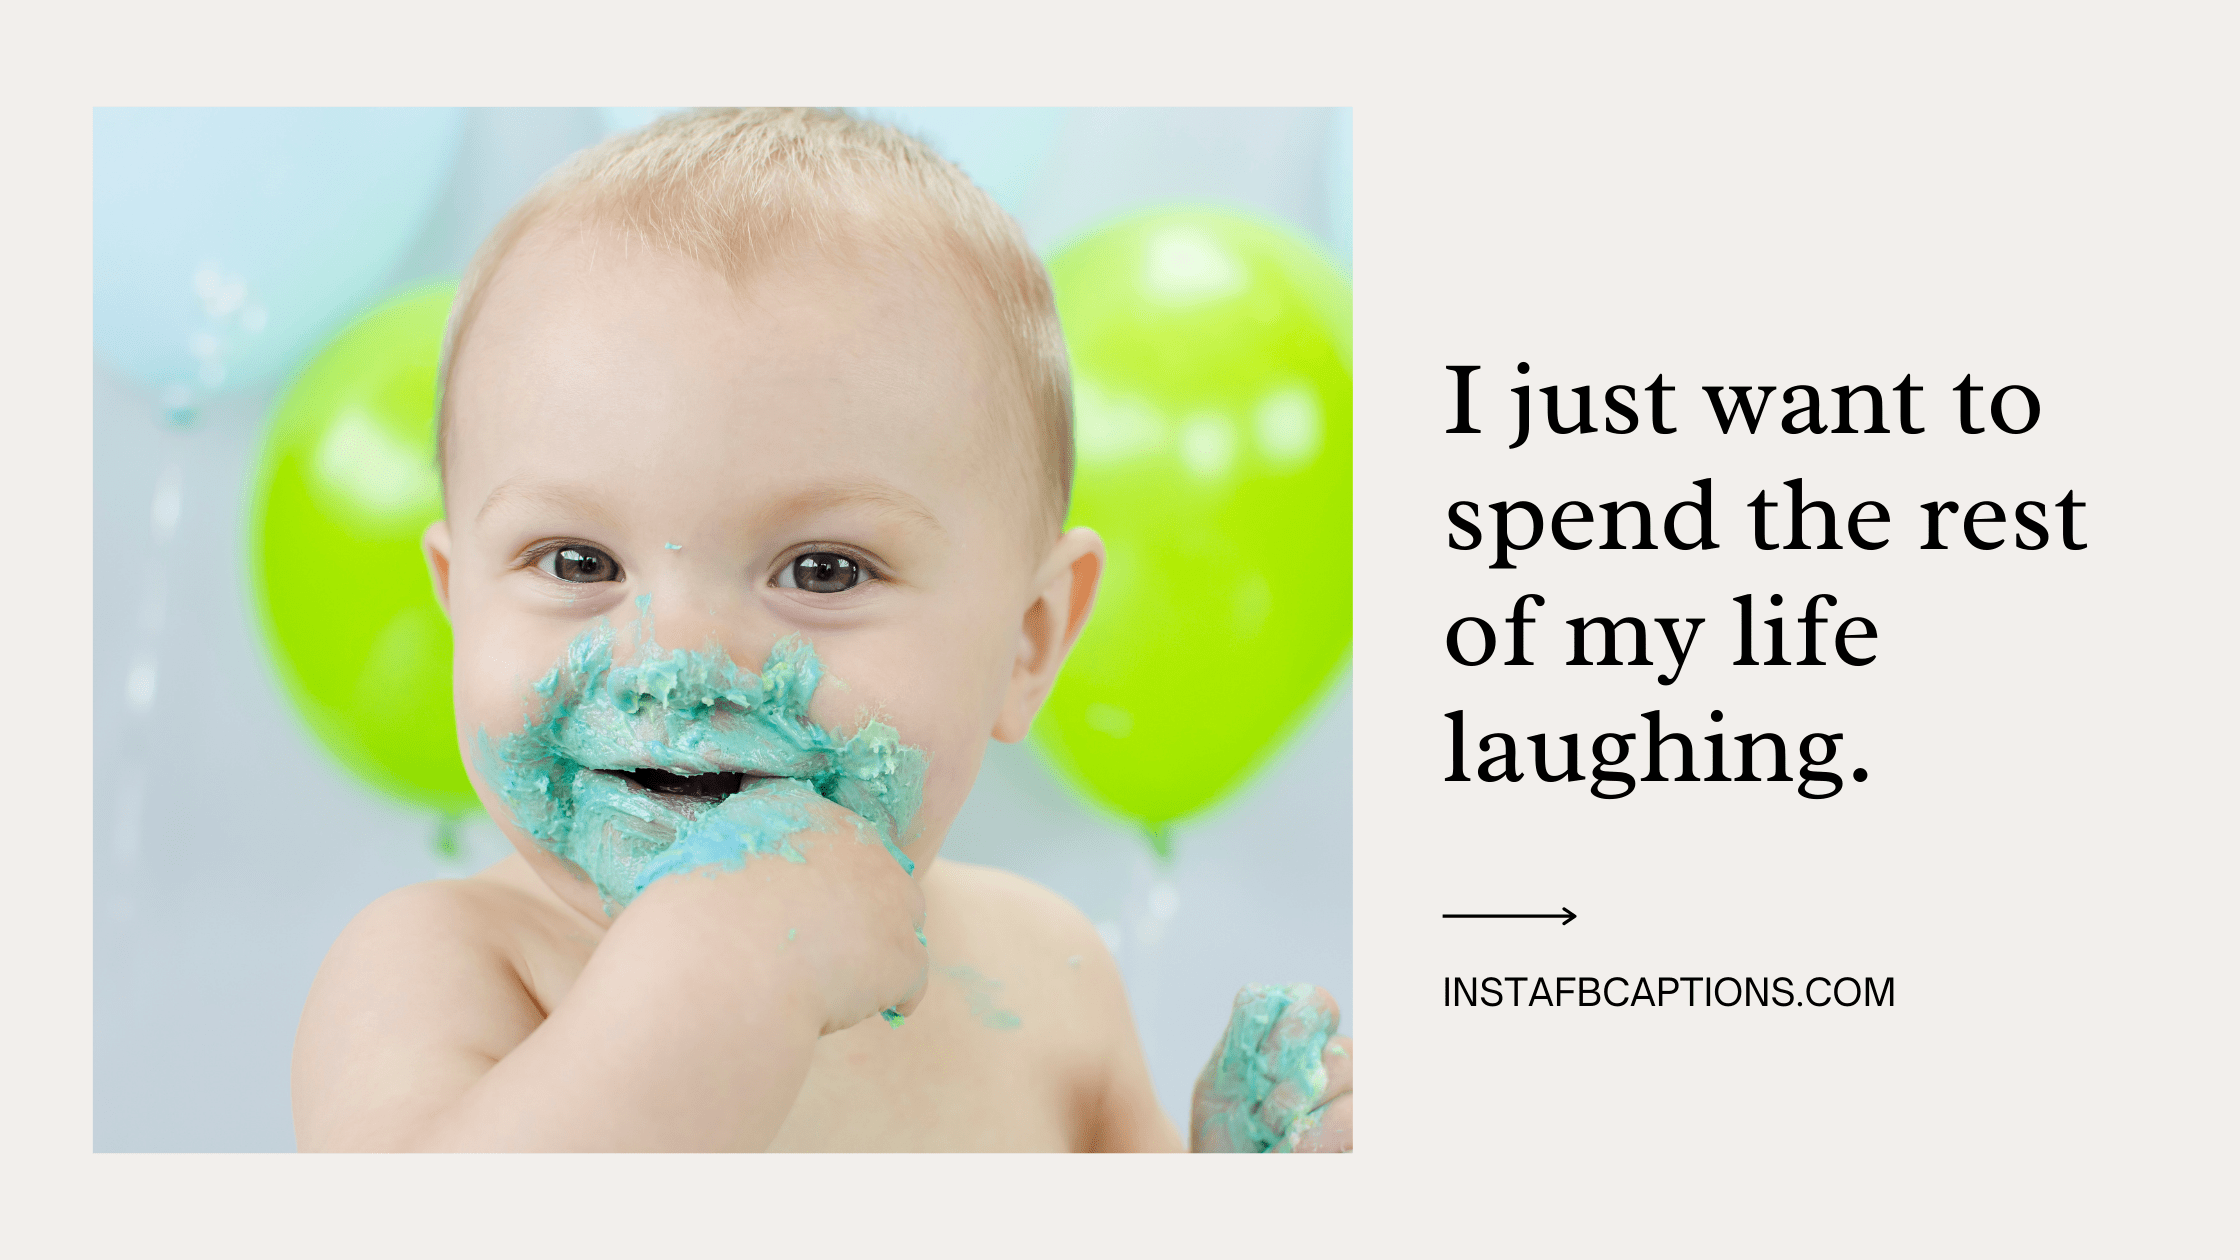 Baby Laughing Captions  - Baby Laughing Captions - 92 Funny Laughing Instagram Captions Quotes in 2022